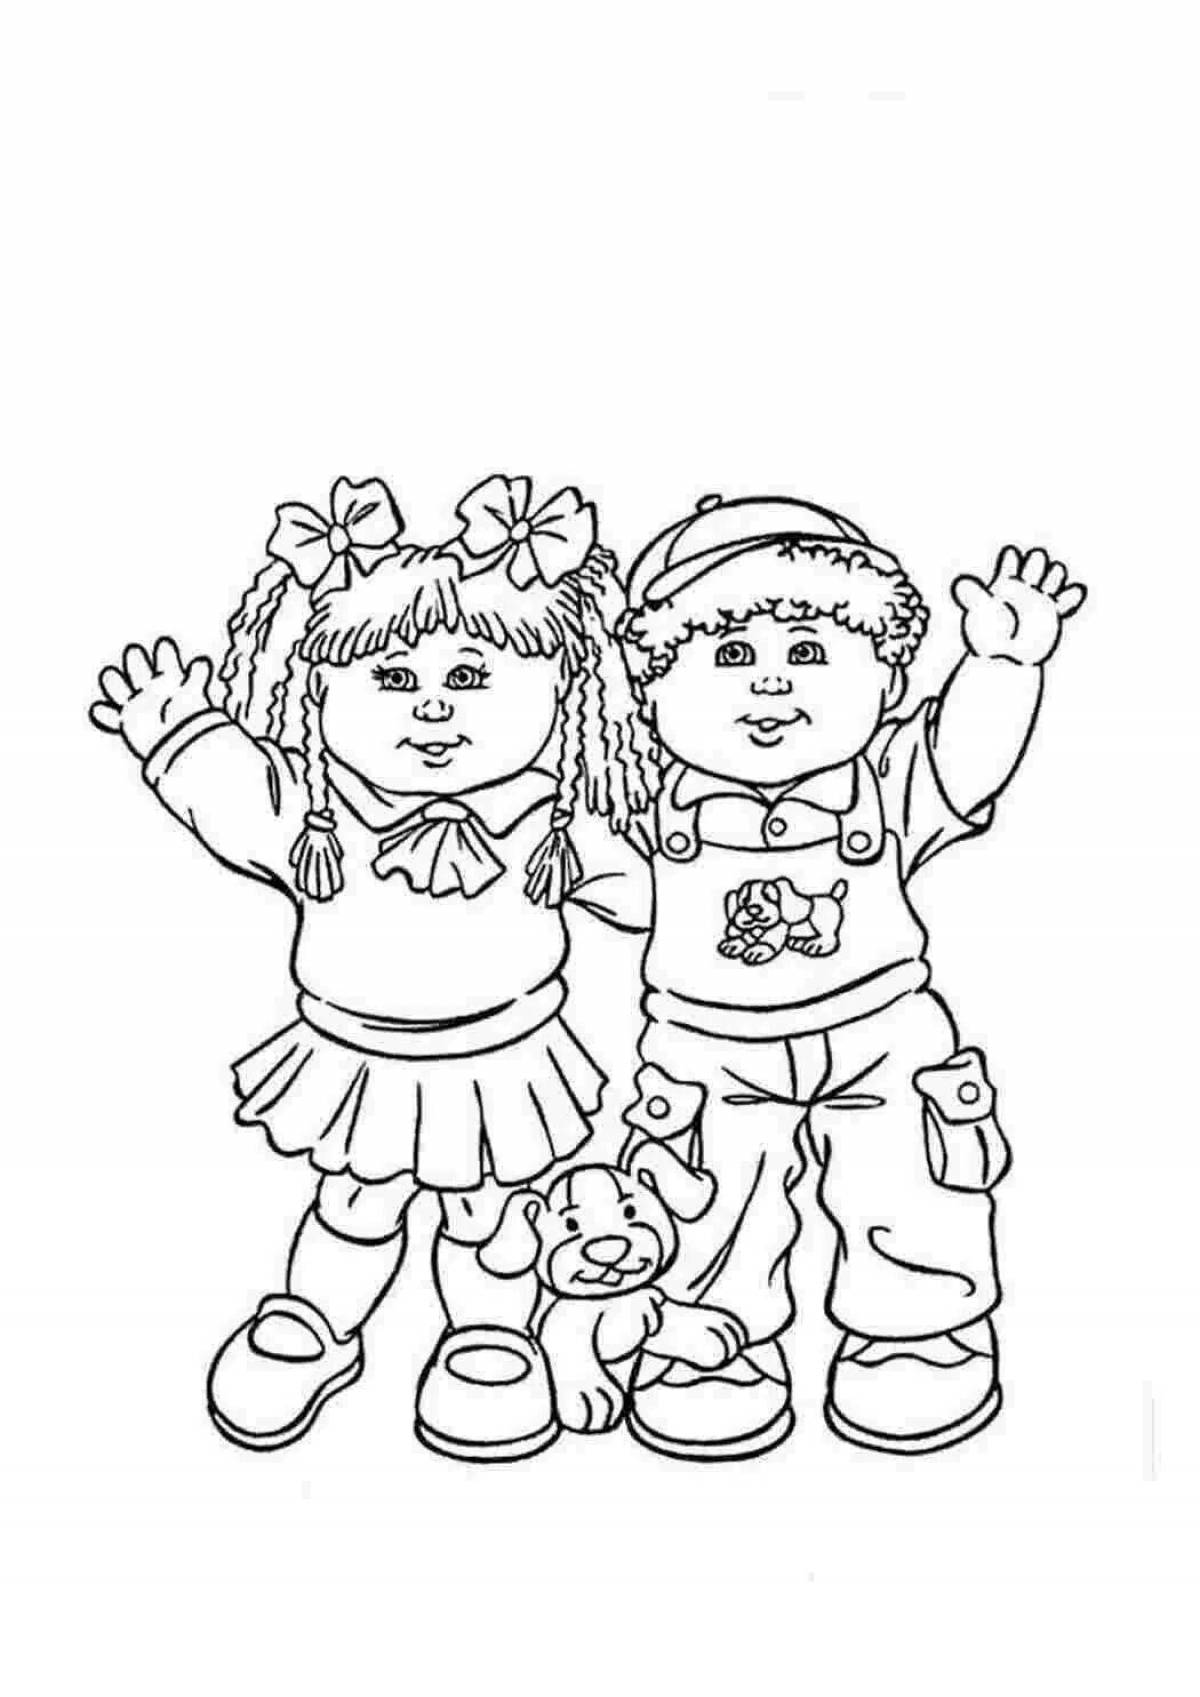 Coloured coloring pages for boys and girls